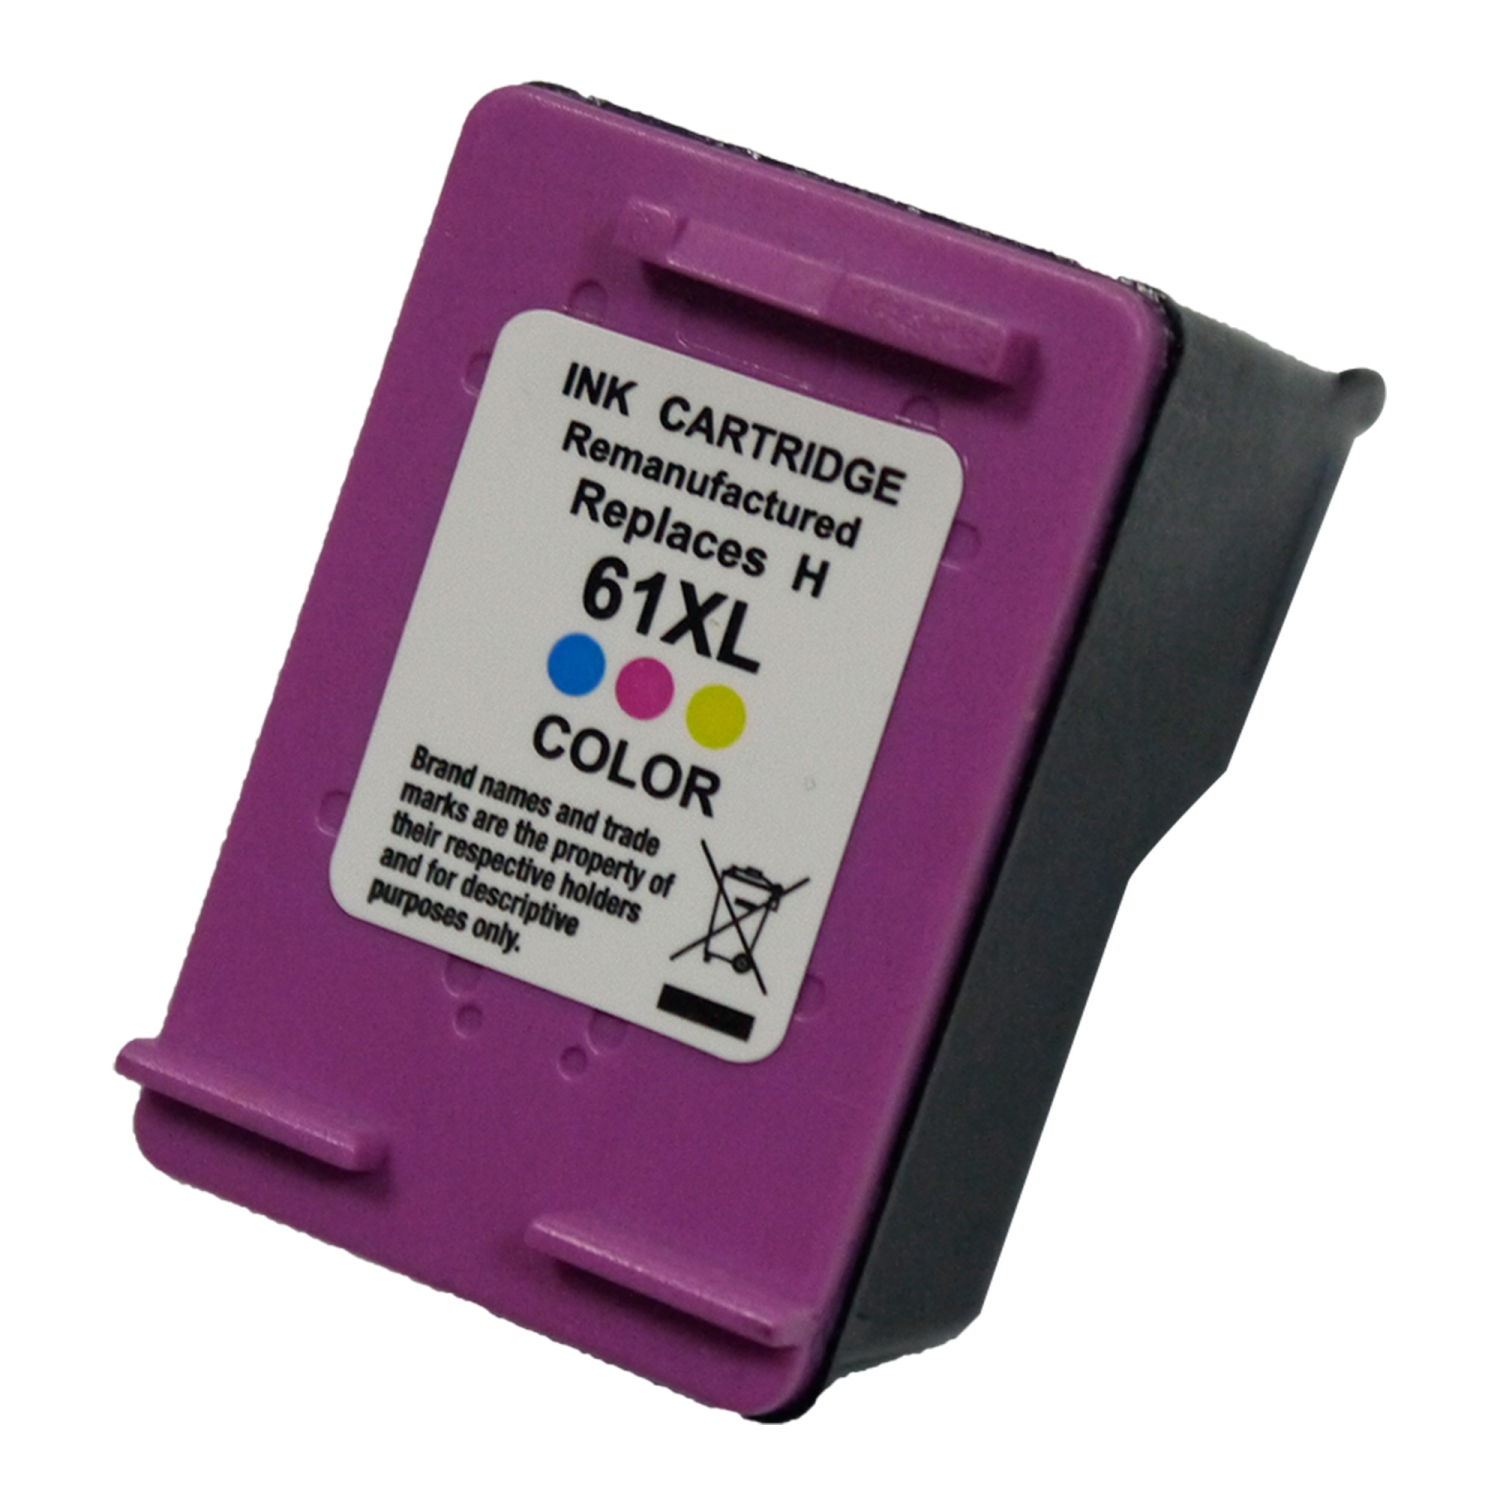 NEW SUPERIOR QUALITY! HP 61XL Color Compatible Ink Cartridge - FREE SHIPPING OVER $50!!